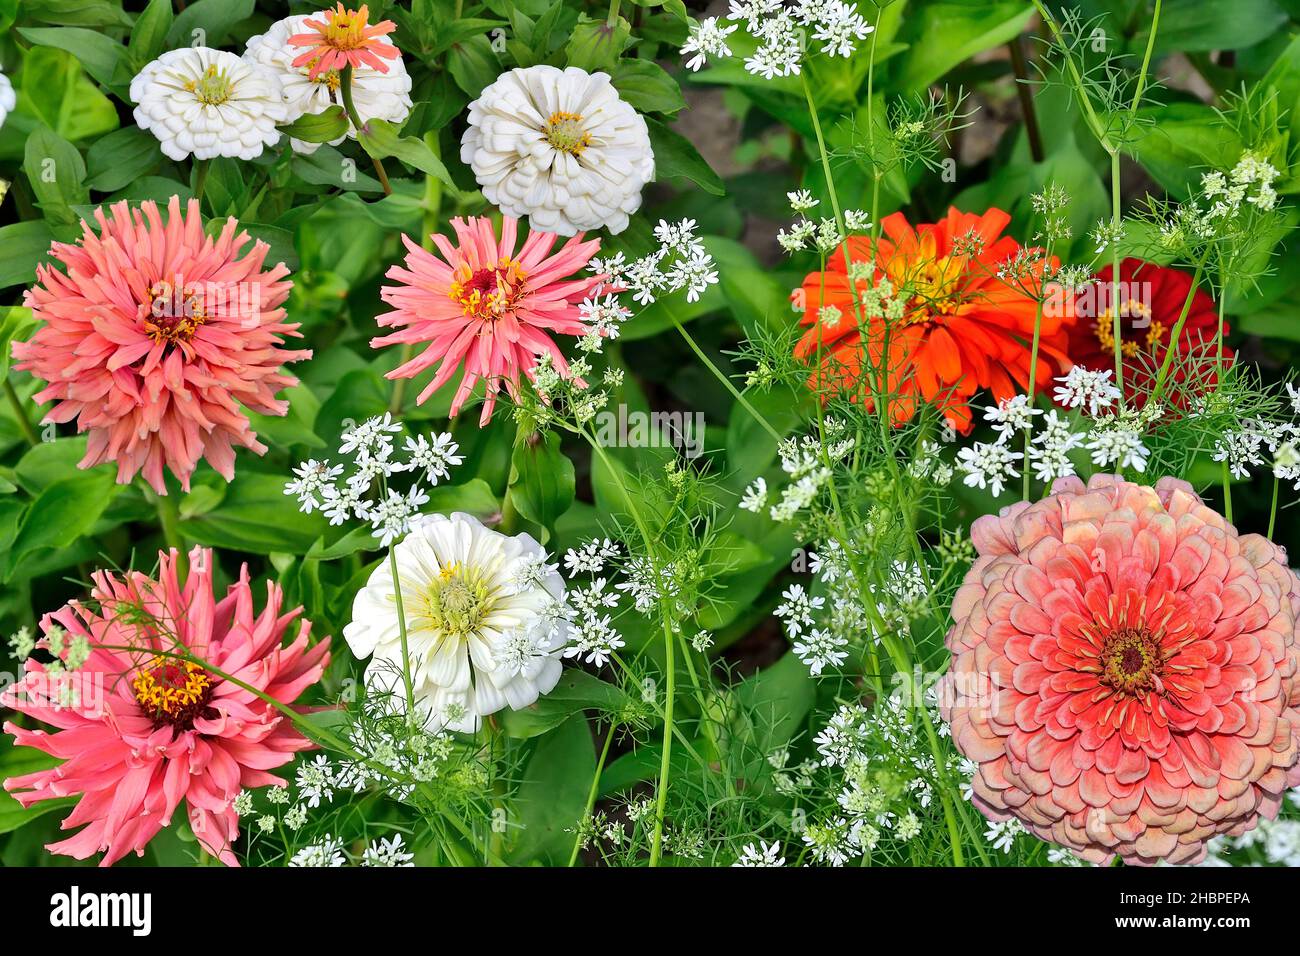 Delicate white and pink or salmon colored zinnia flowers on flowerbed. Summer gentle floral background with blossoming zinnias on defocussed green lea Stock Photo